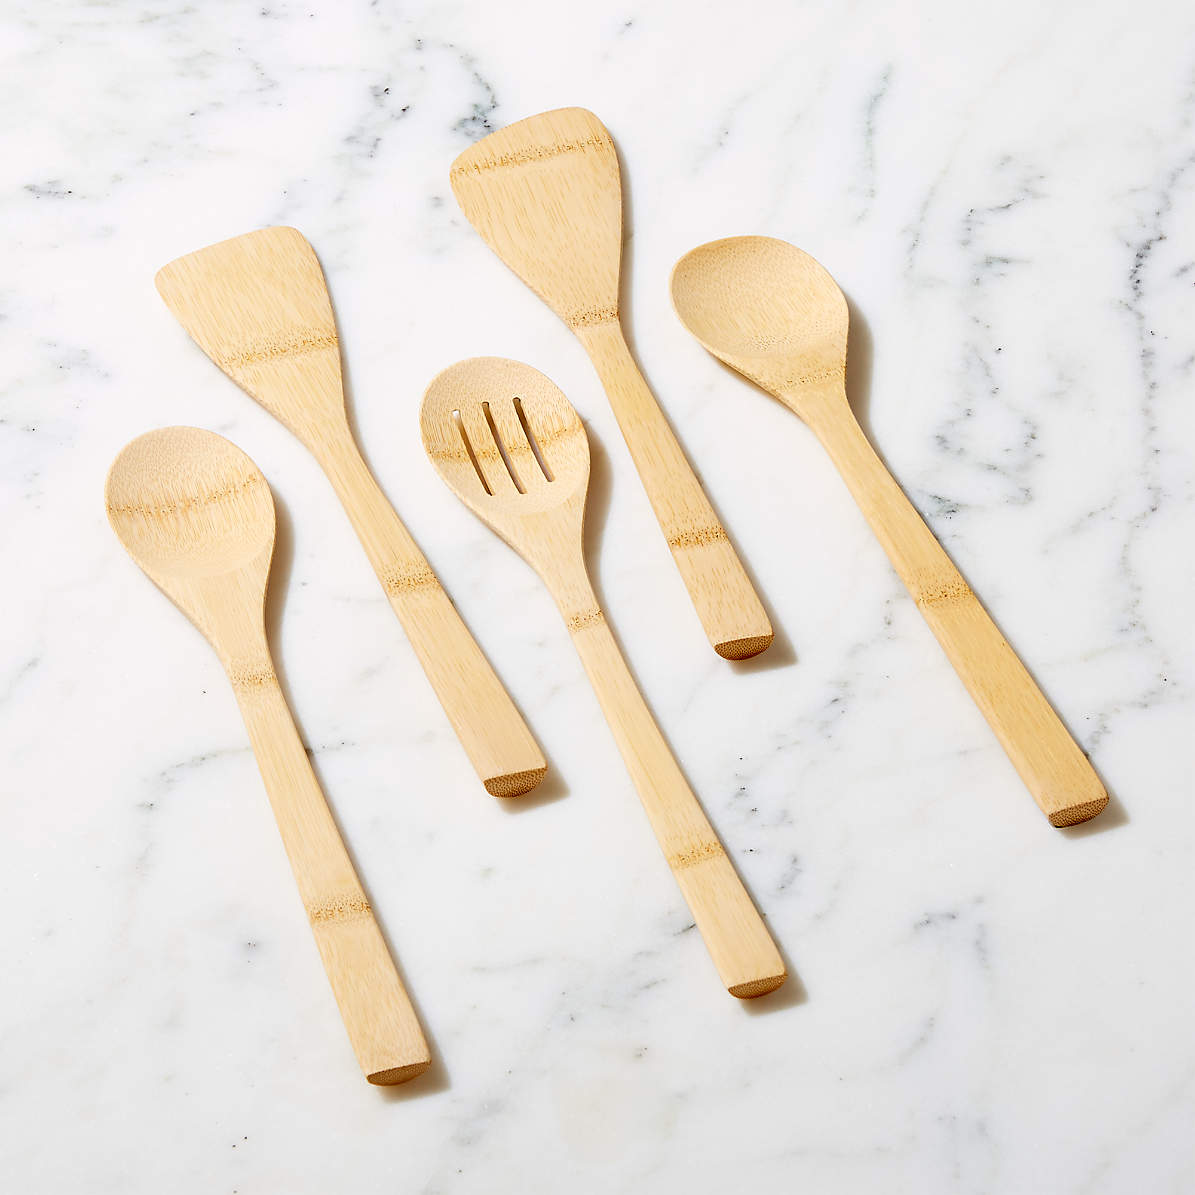 2* Kitchen Brand New Bamboo Spoon Spatula Wooden Utensils Cooking Spoon Tools 